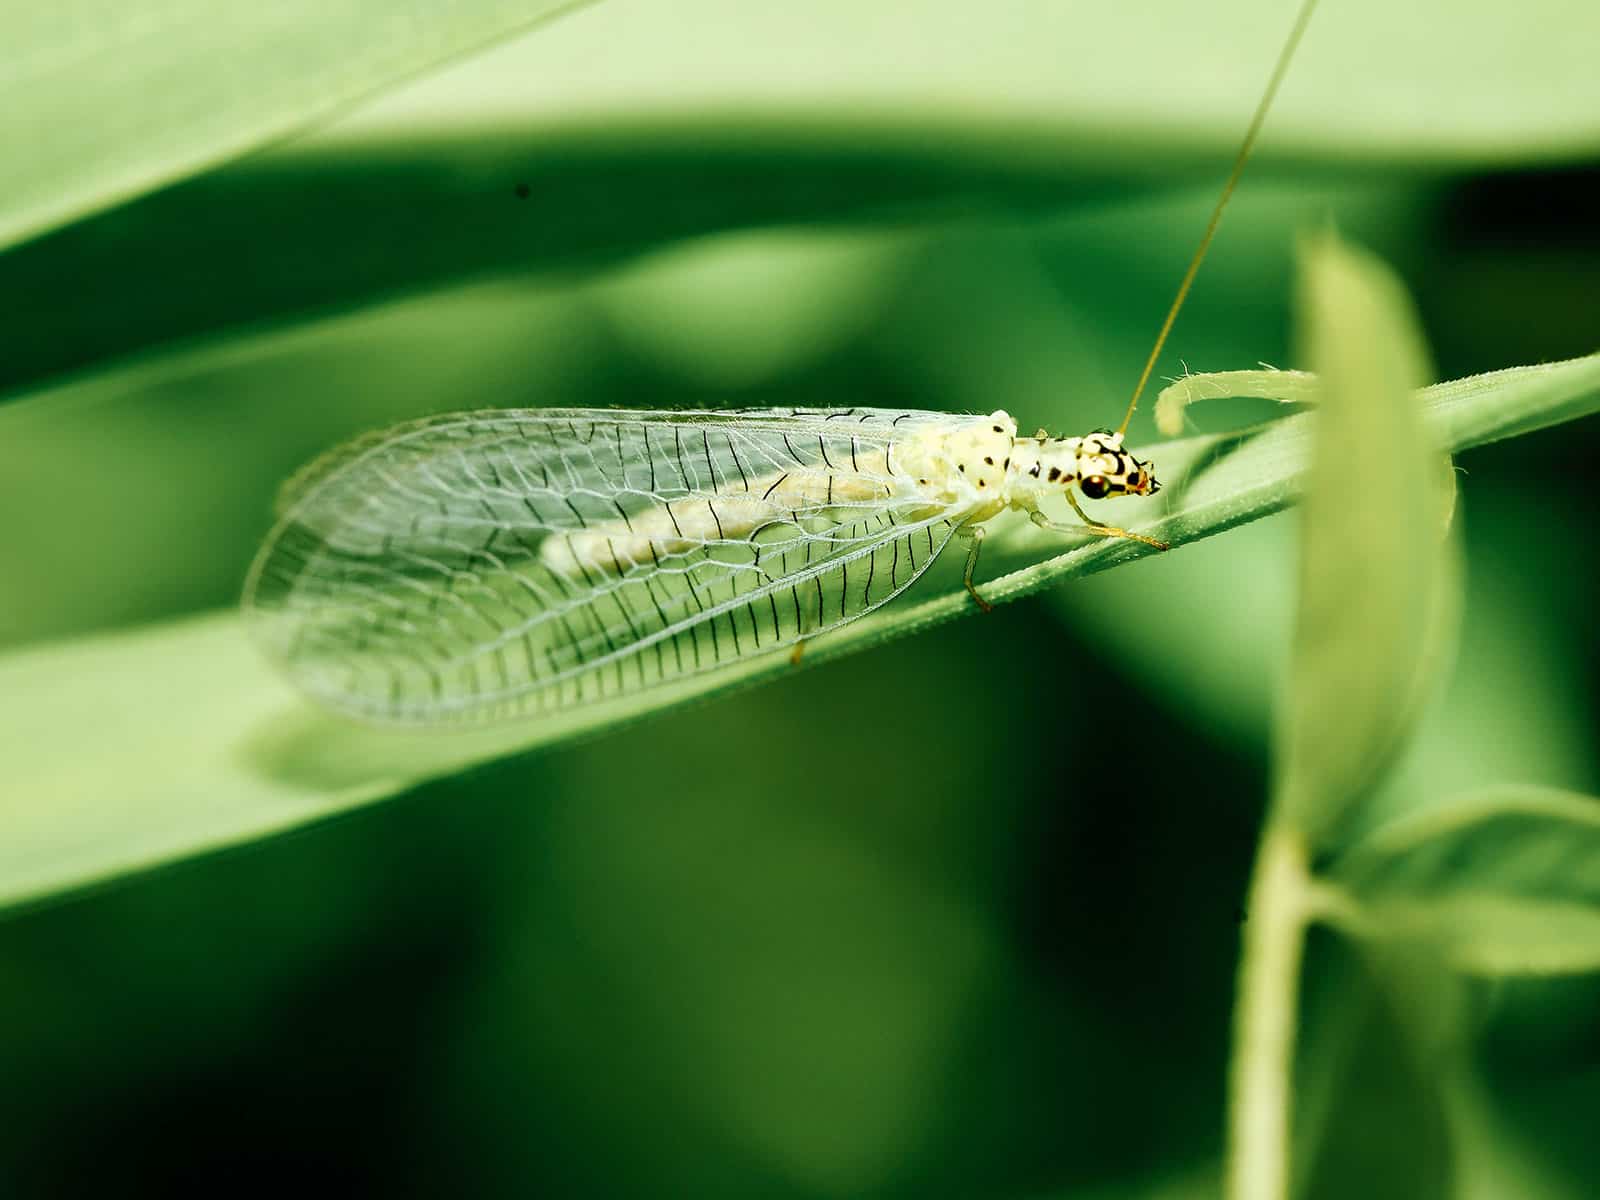 Golden-eyed lacewing perched on a narrow green leaf